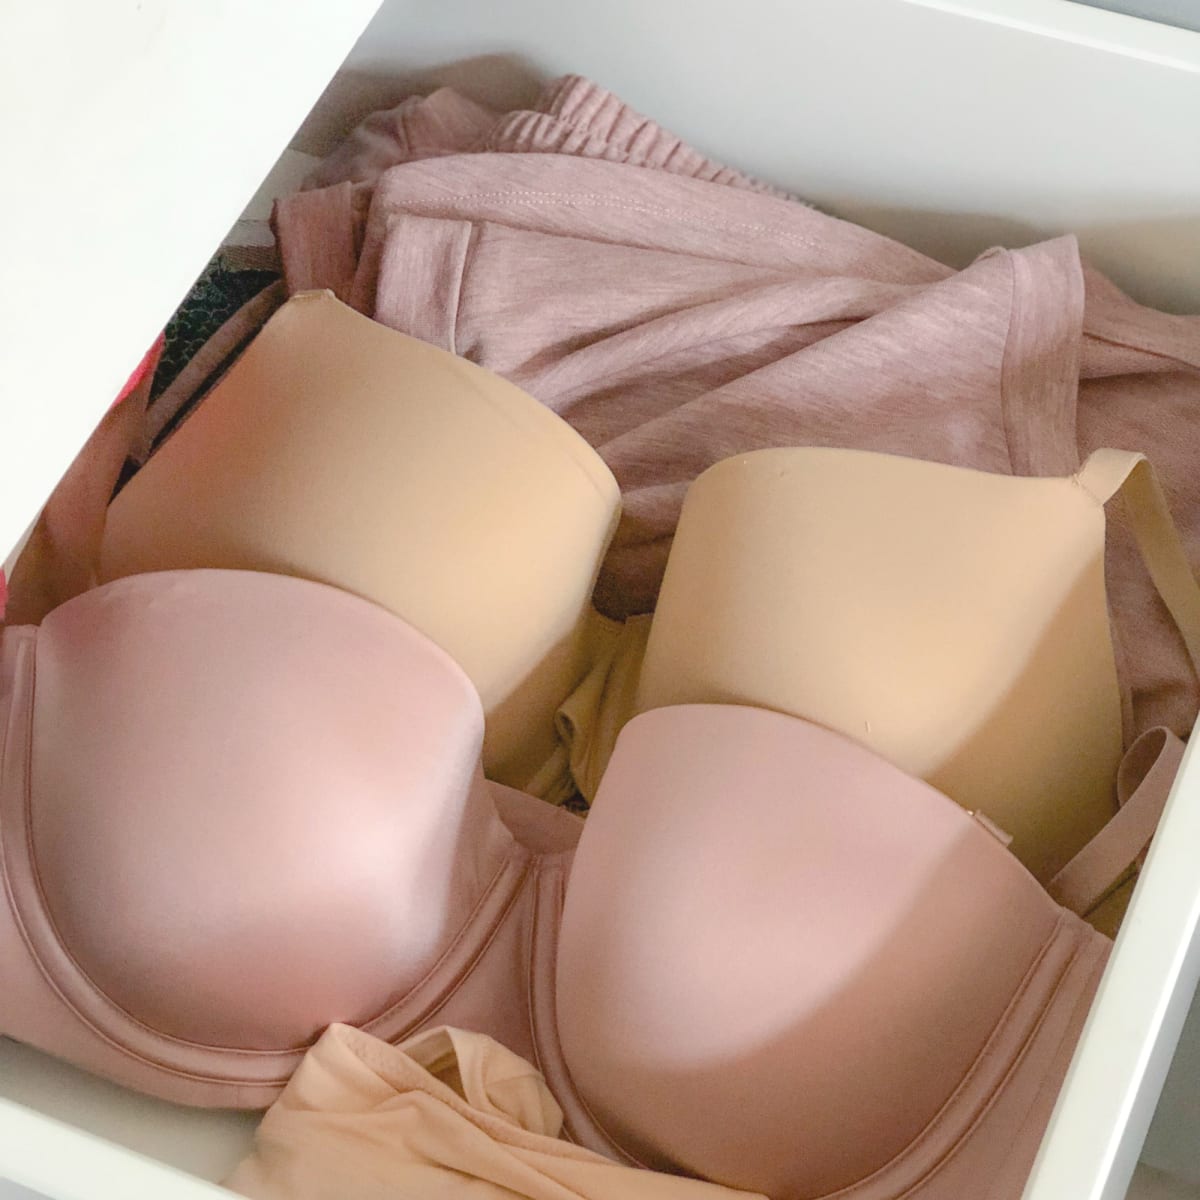 Why You Need to Update Your Underwear Drawer Now - MomTrends